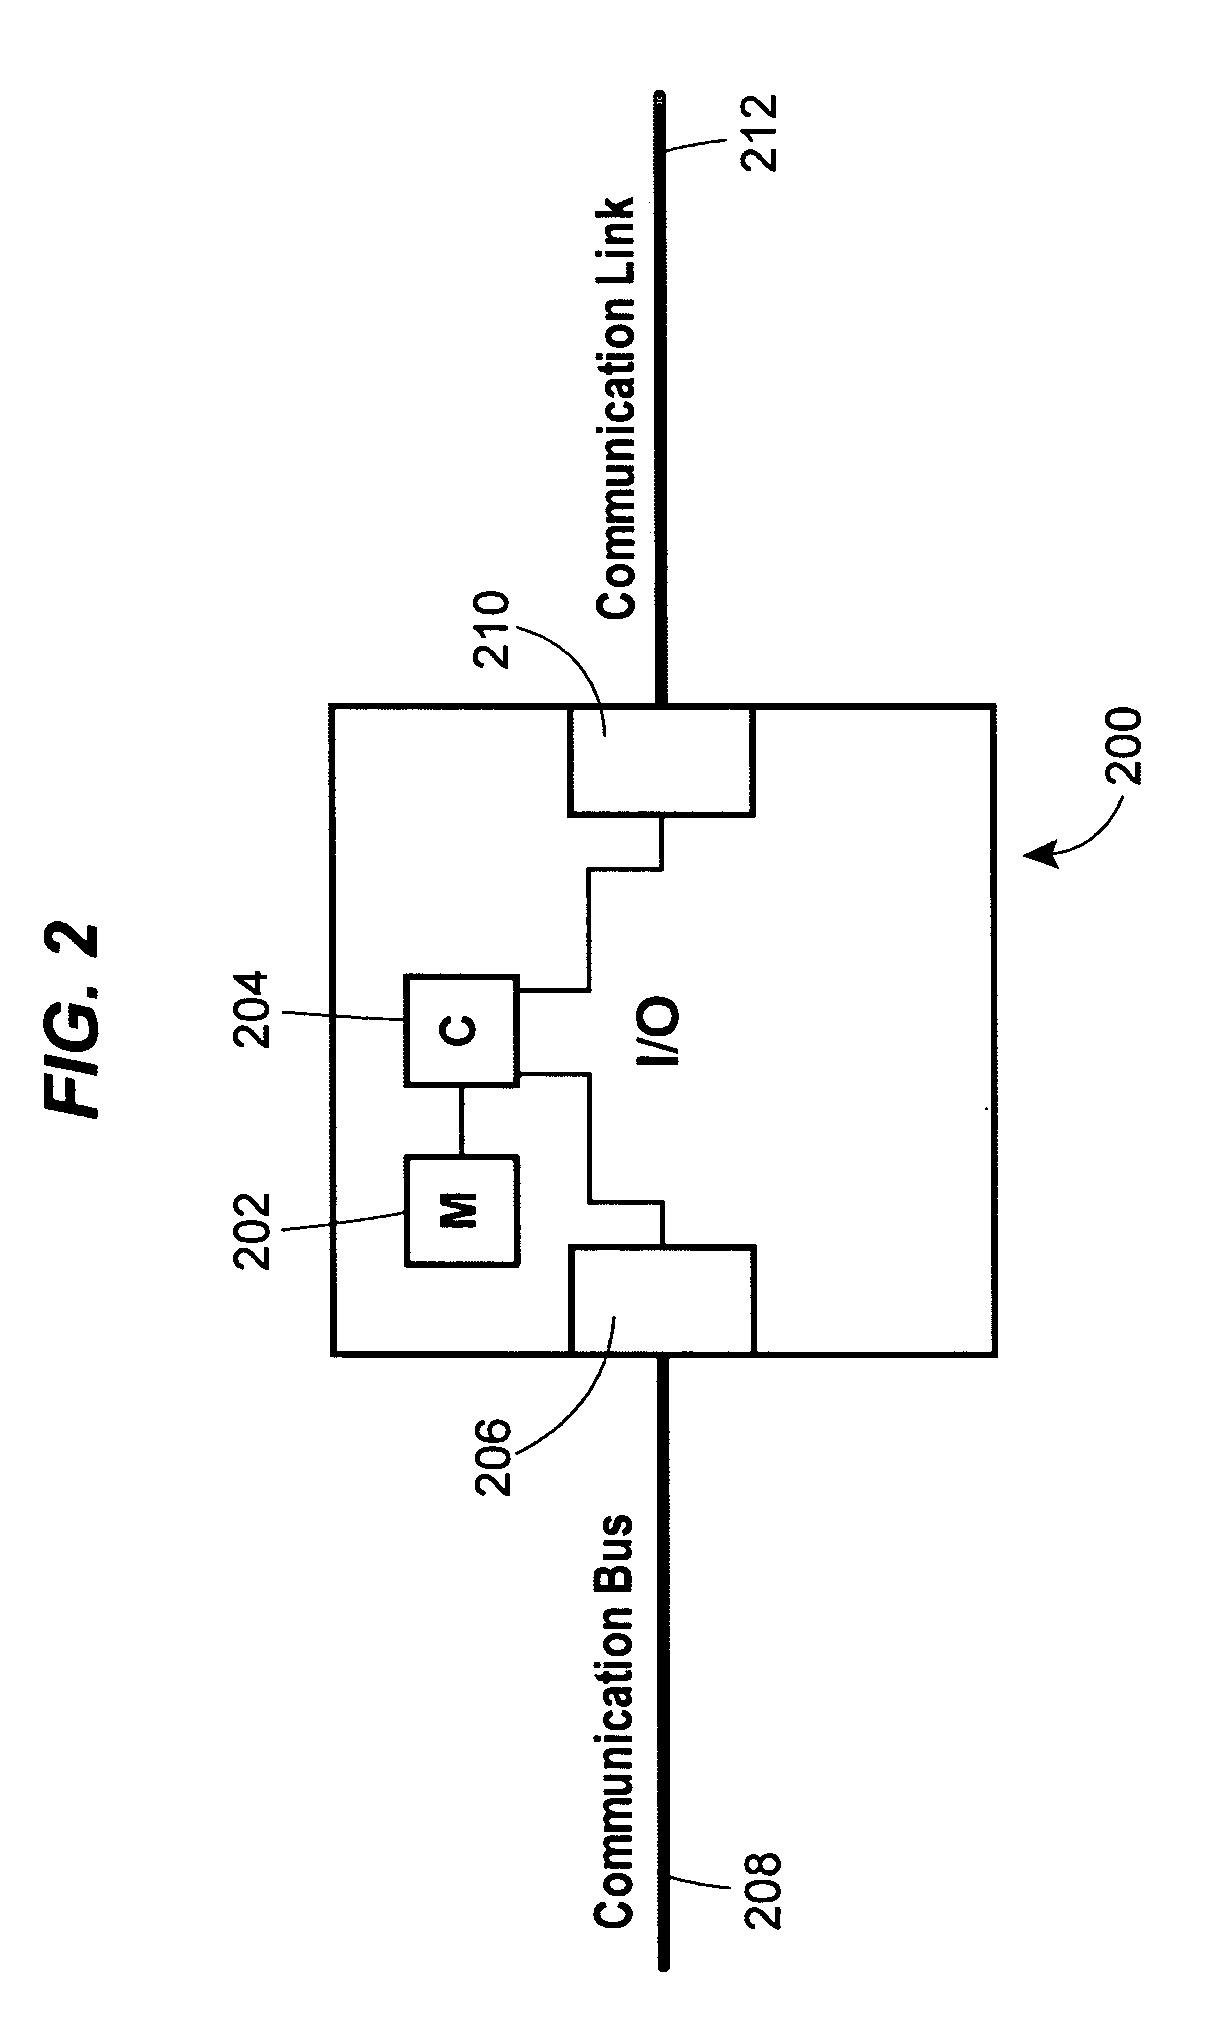 Method for intercontroller communications in a safety instrumented system or a process control system